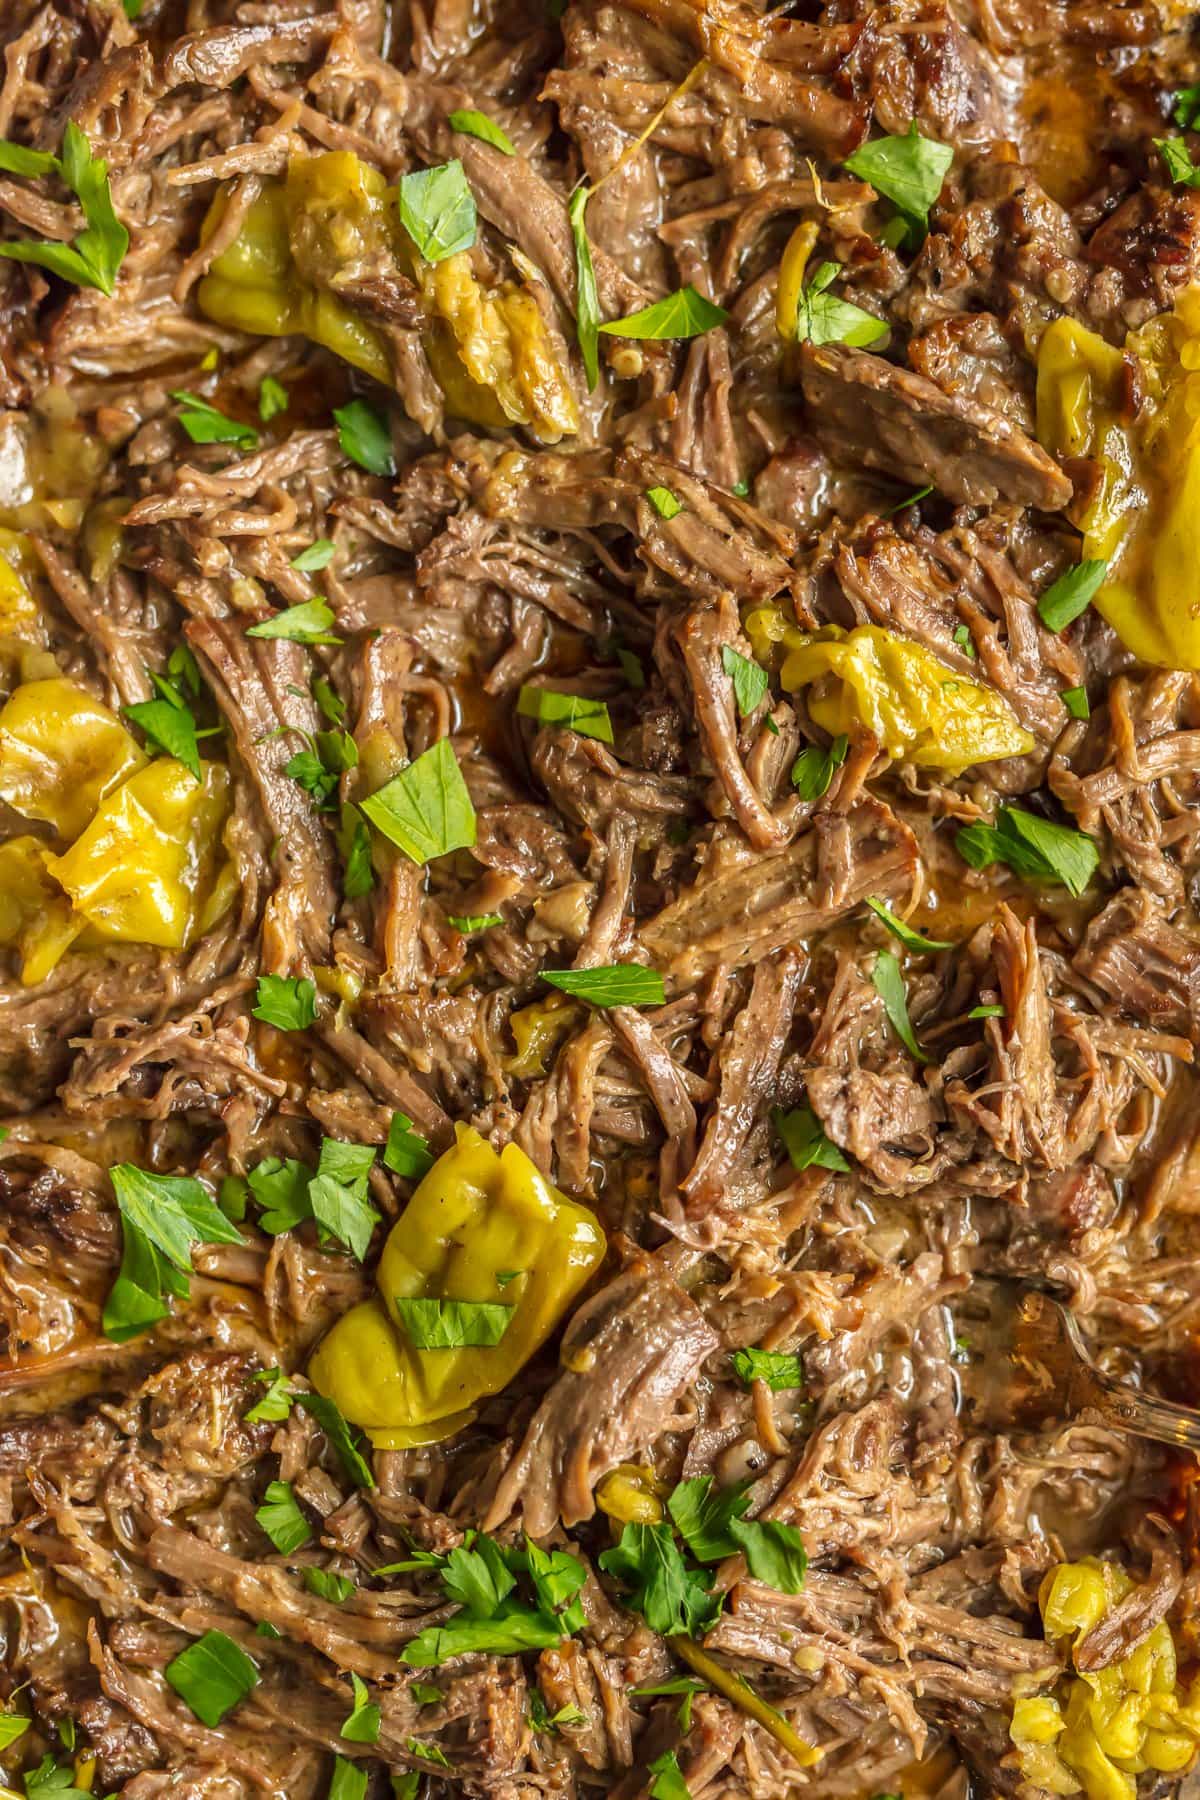 This MISSISSIPPI ROAST is the absolute best slow cooker roast beef you will EVER make! Made famous throughout the years, you just have to try this! Perfect crockpot roast beef for sandwiches, tacos, and beyond!